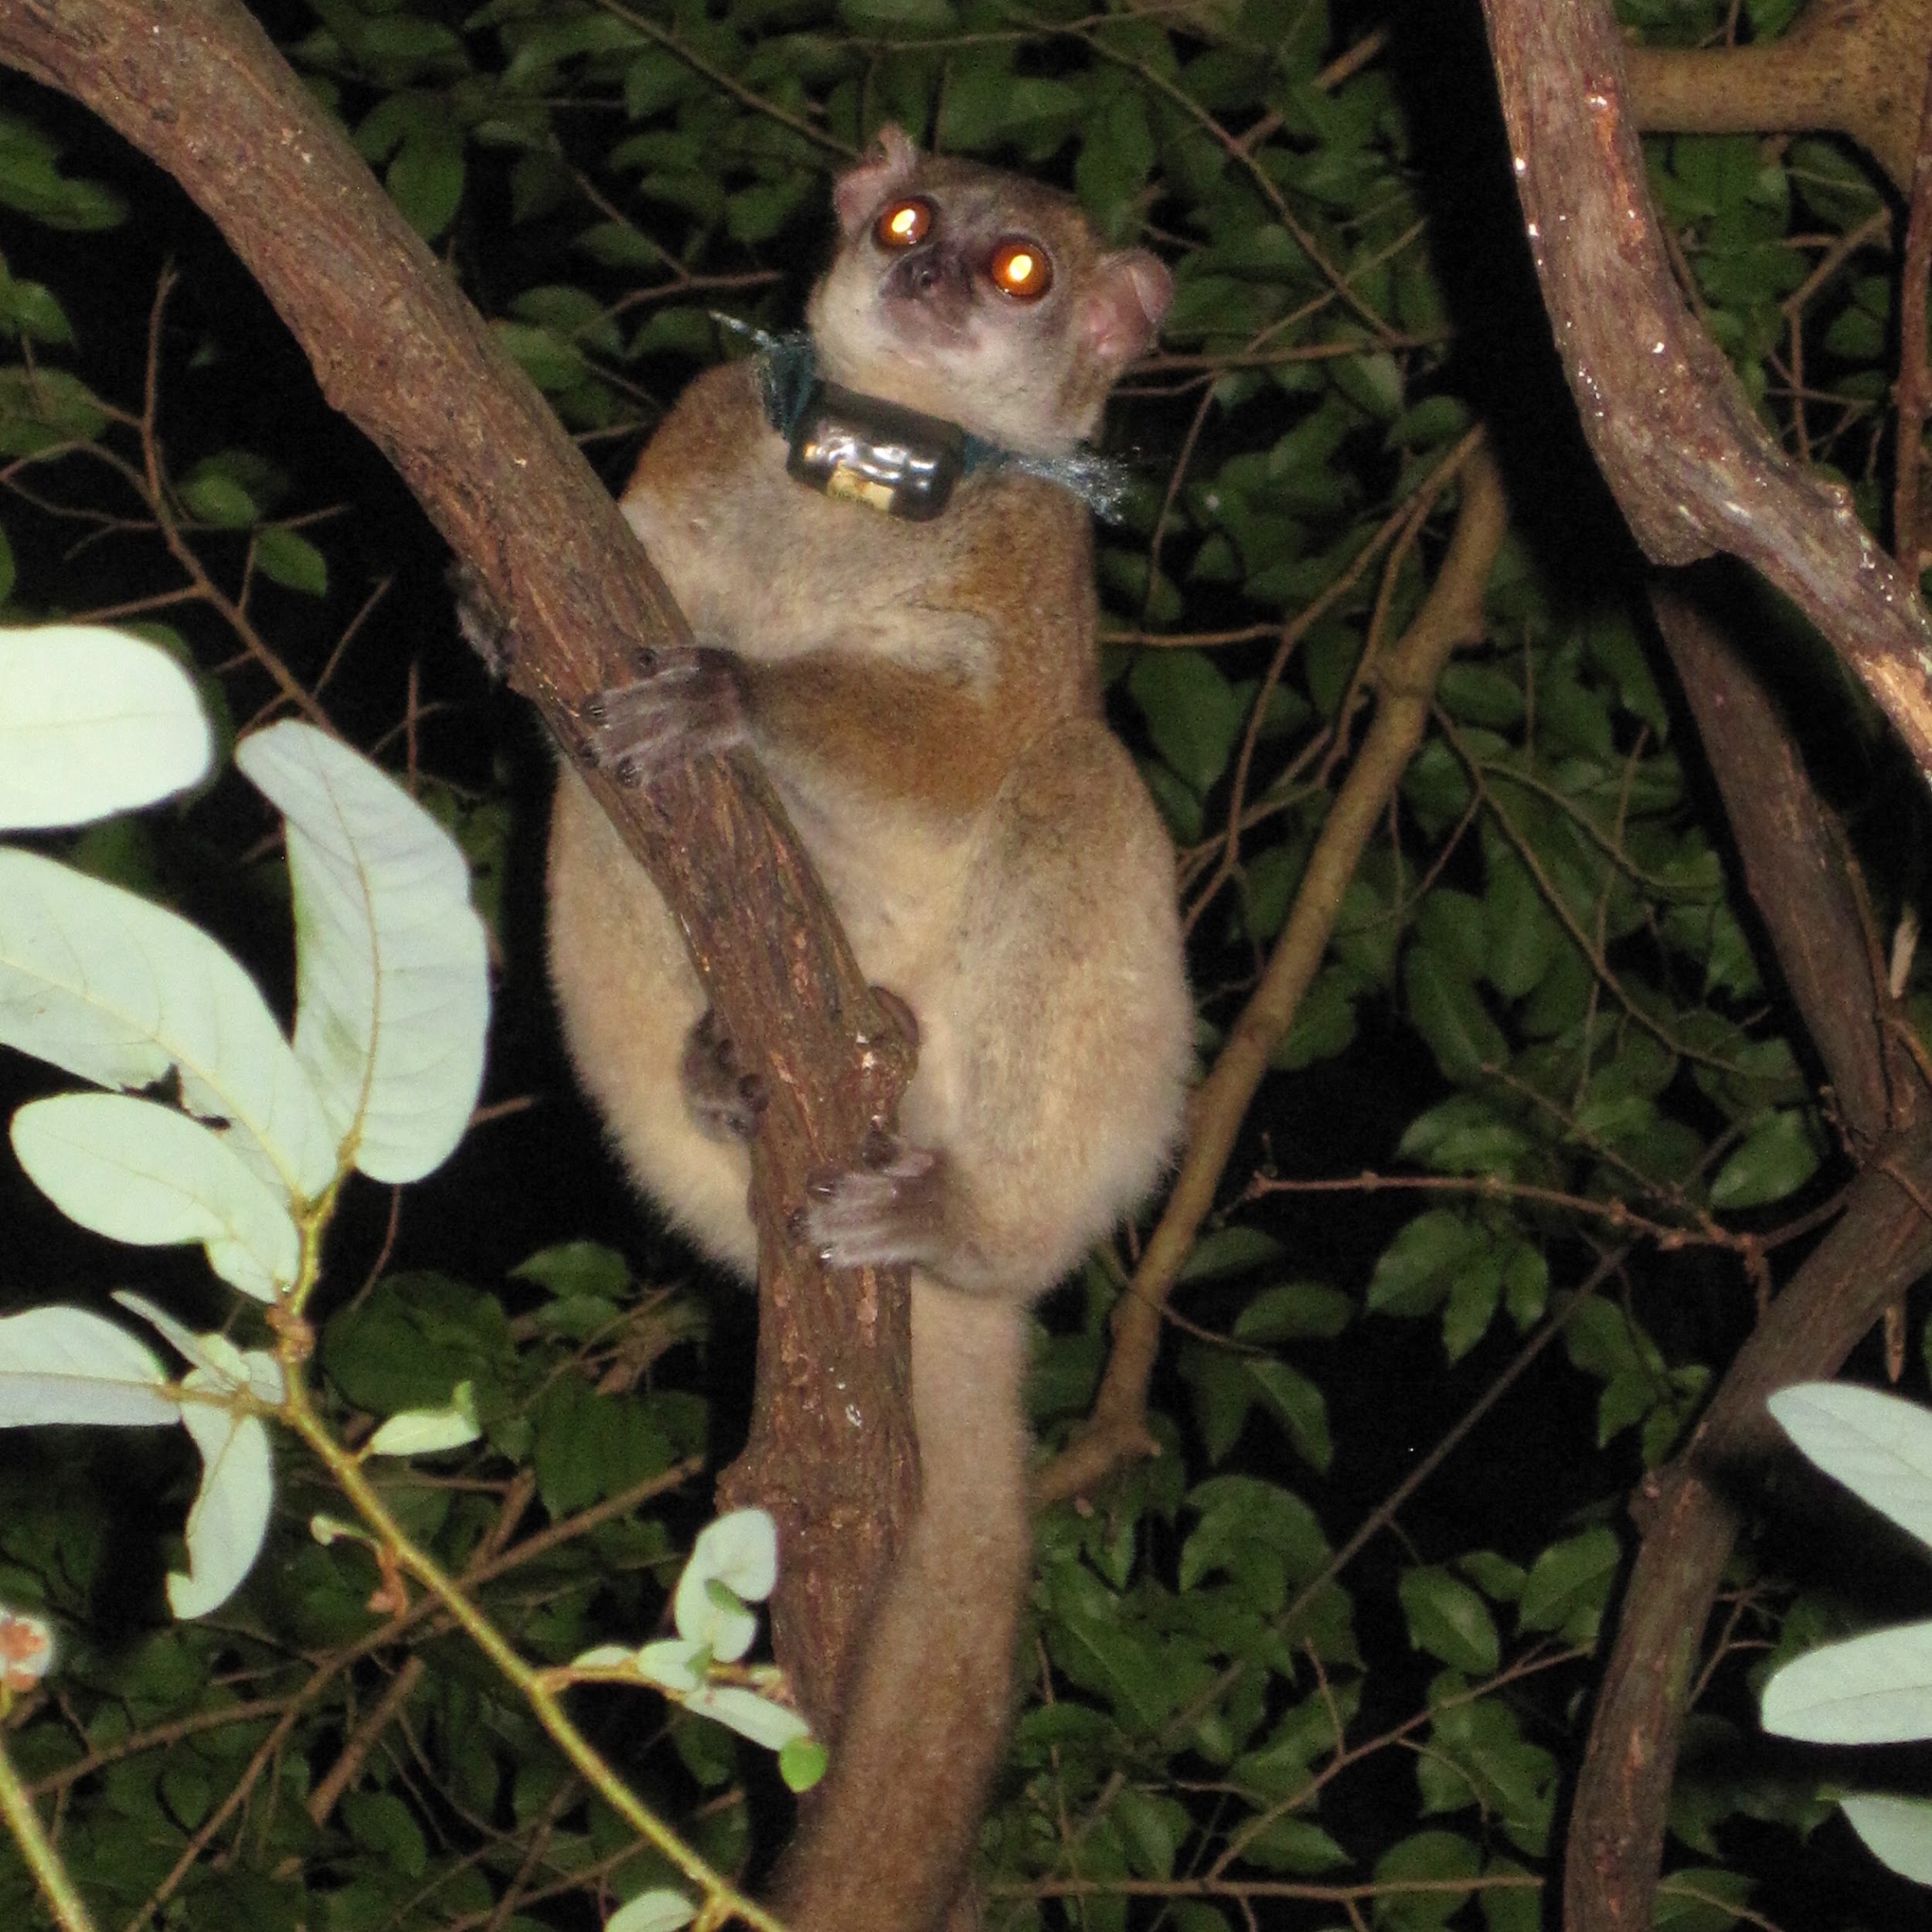 A small lemur with a research collar clings to a tree.